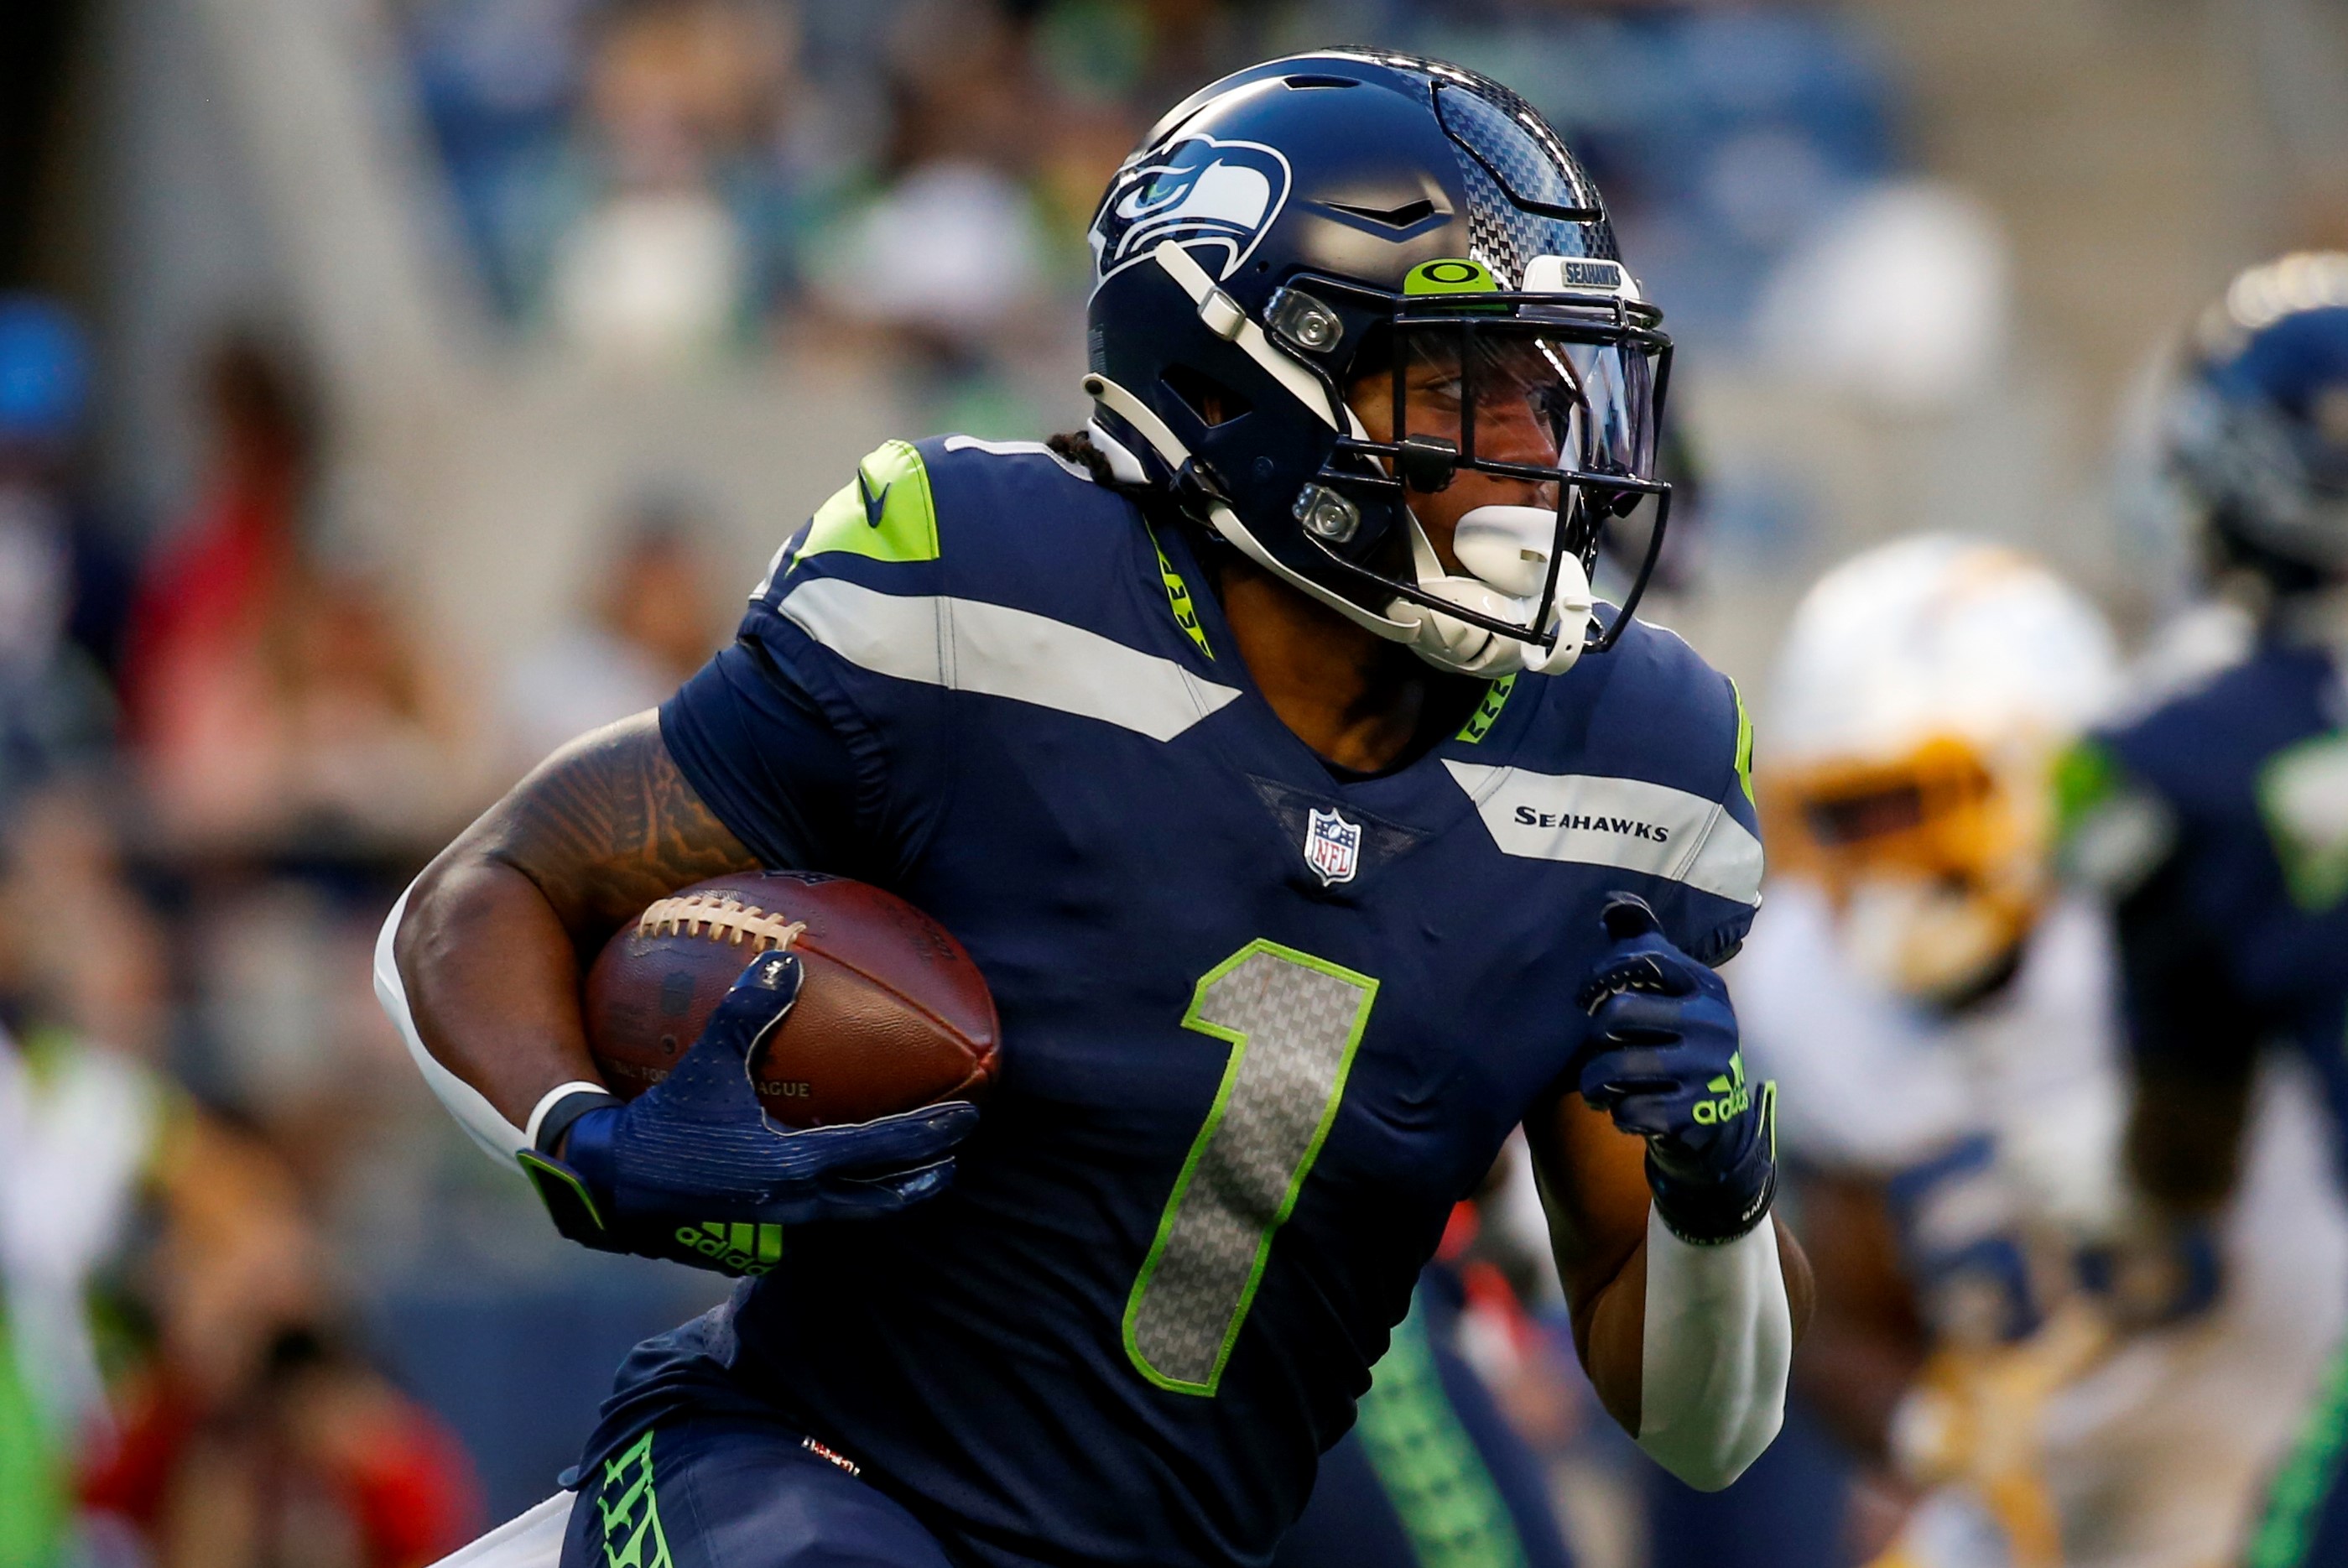 Seattle Seahawks wide receiver D'Wayne Eskridge (1) runs the ball against the Los Angeles Chargers during the first quarter at Lumen Field.